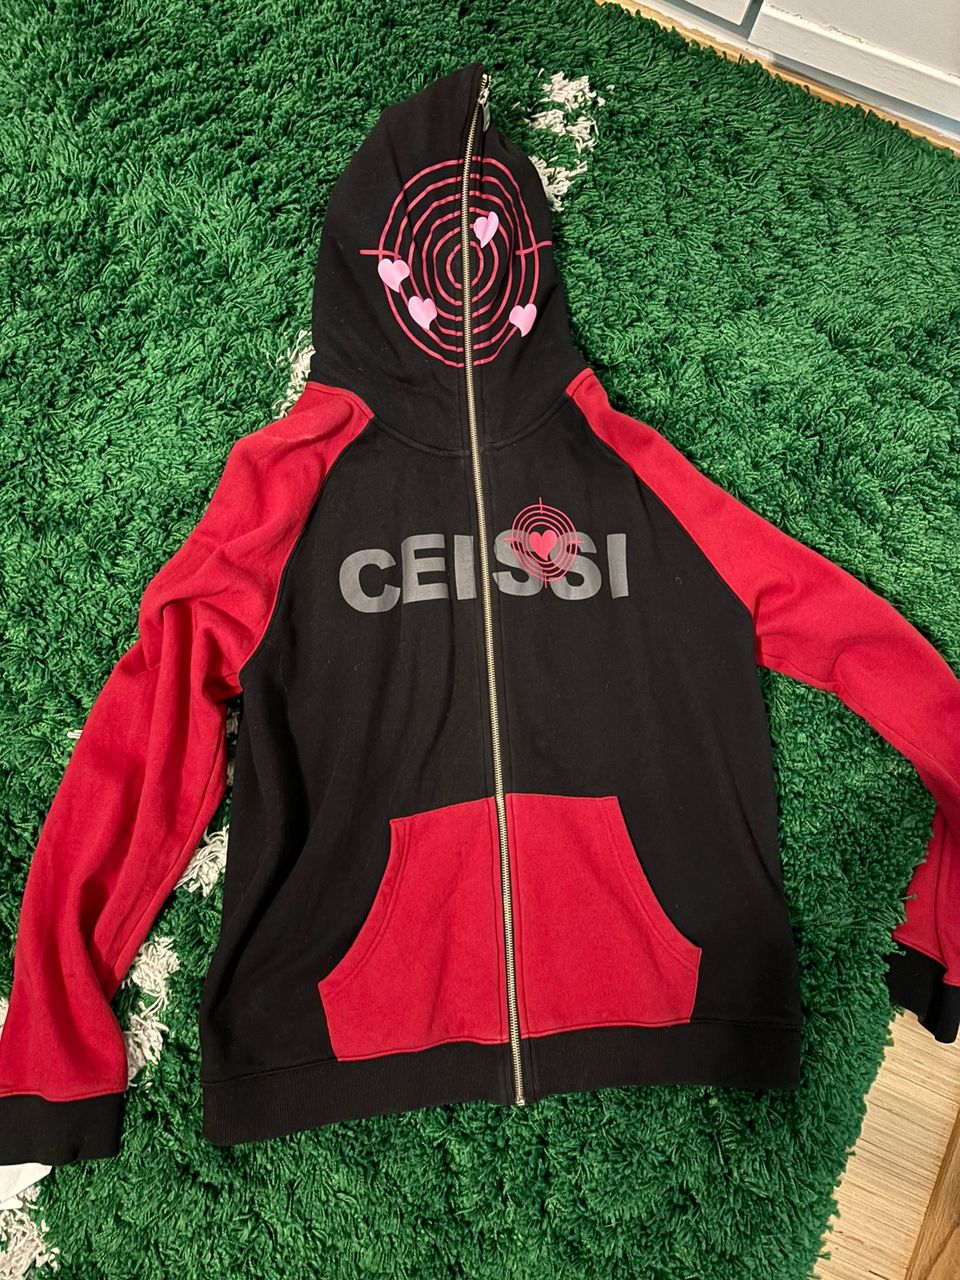 Cledos ceissi merch